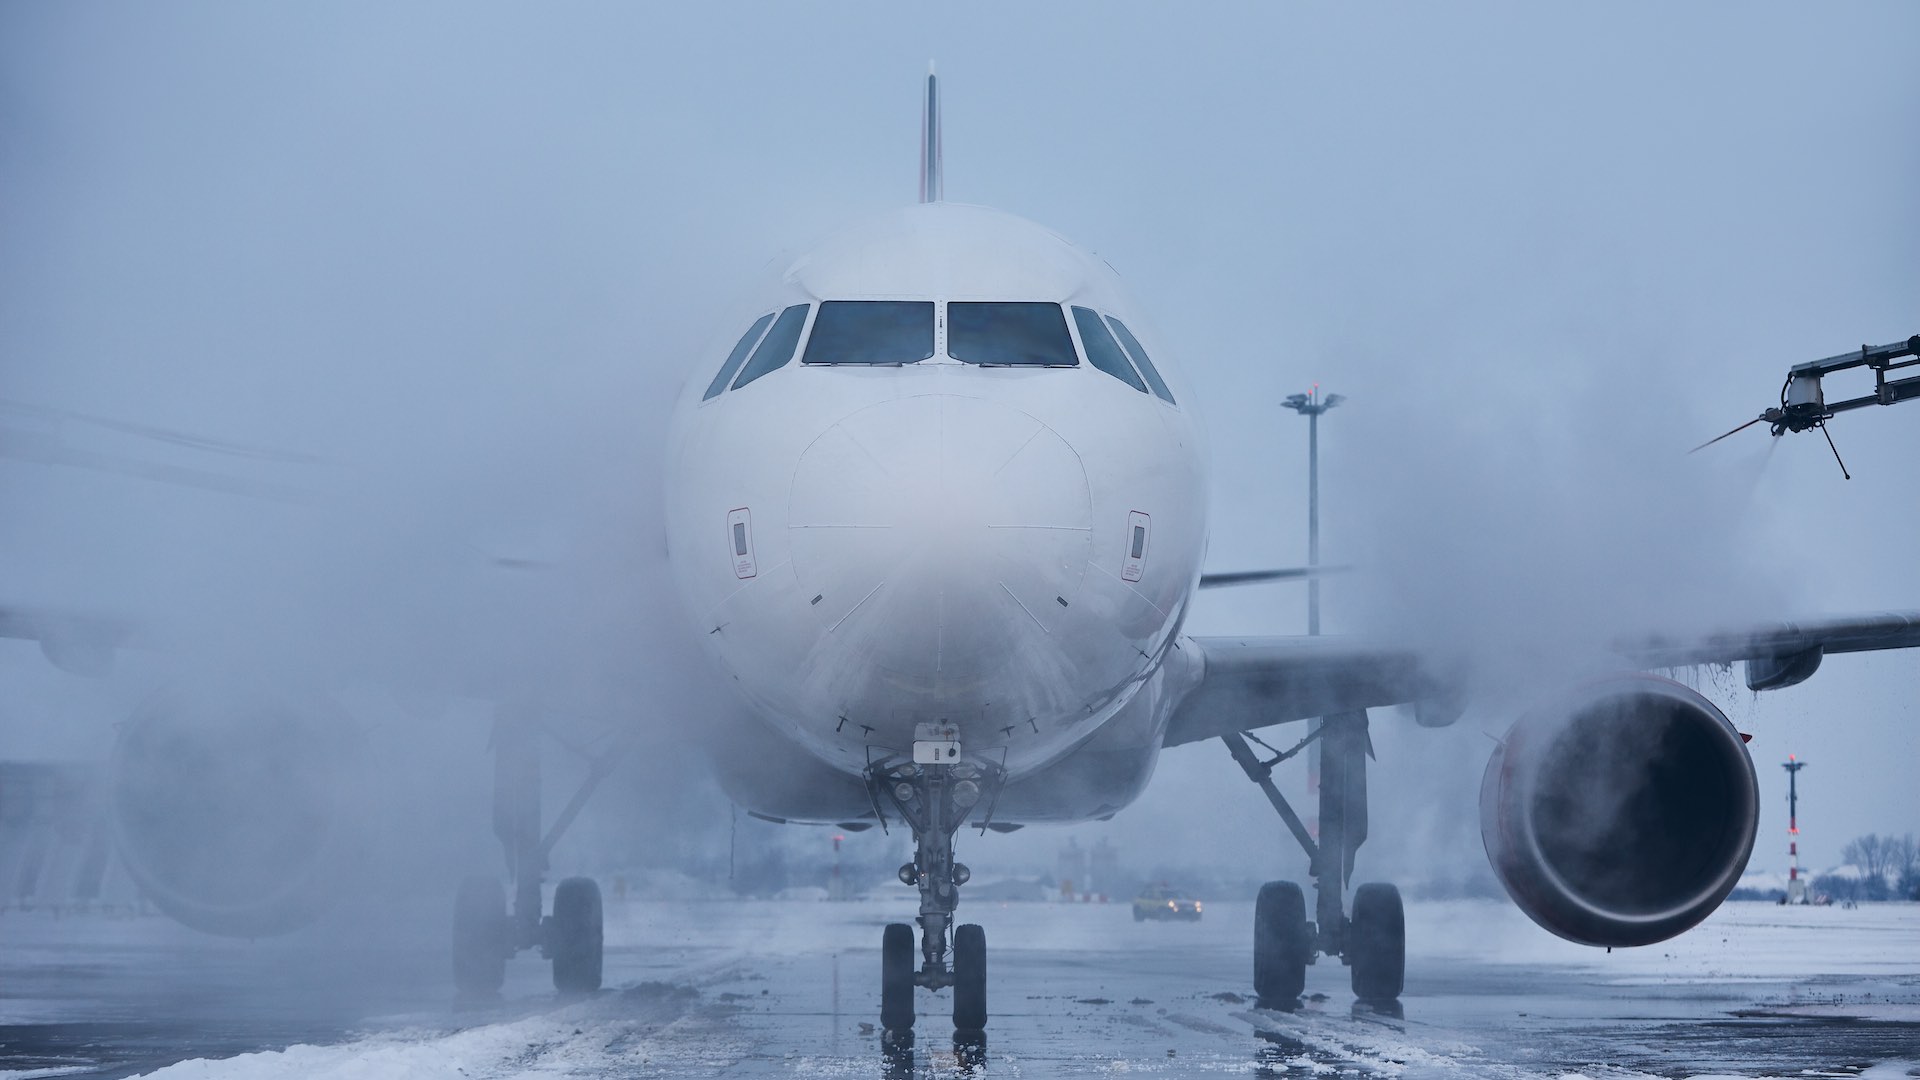 Heavy snowfall leads to mass cancellations at Frankfurt airport